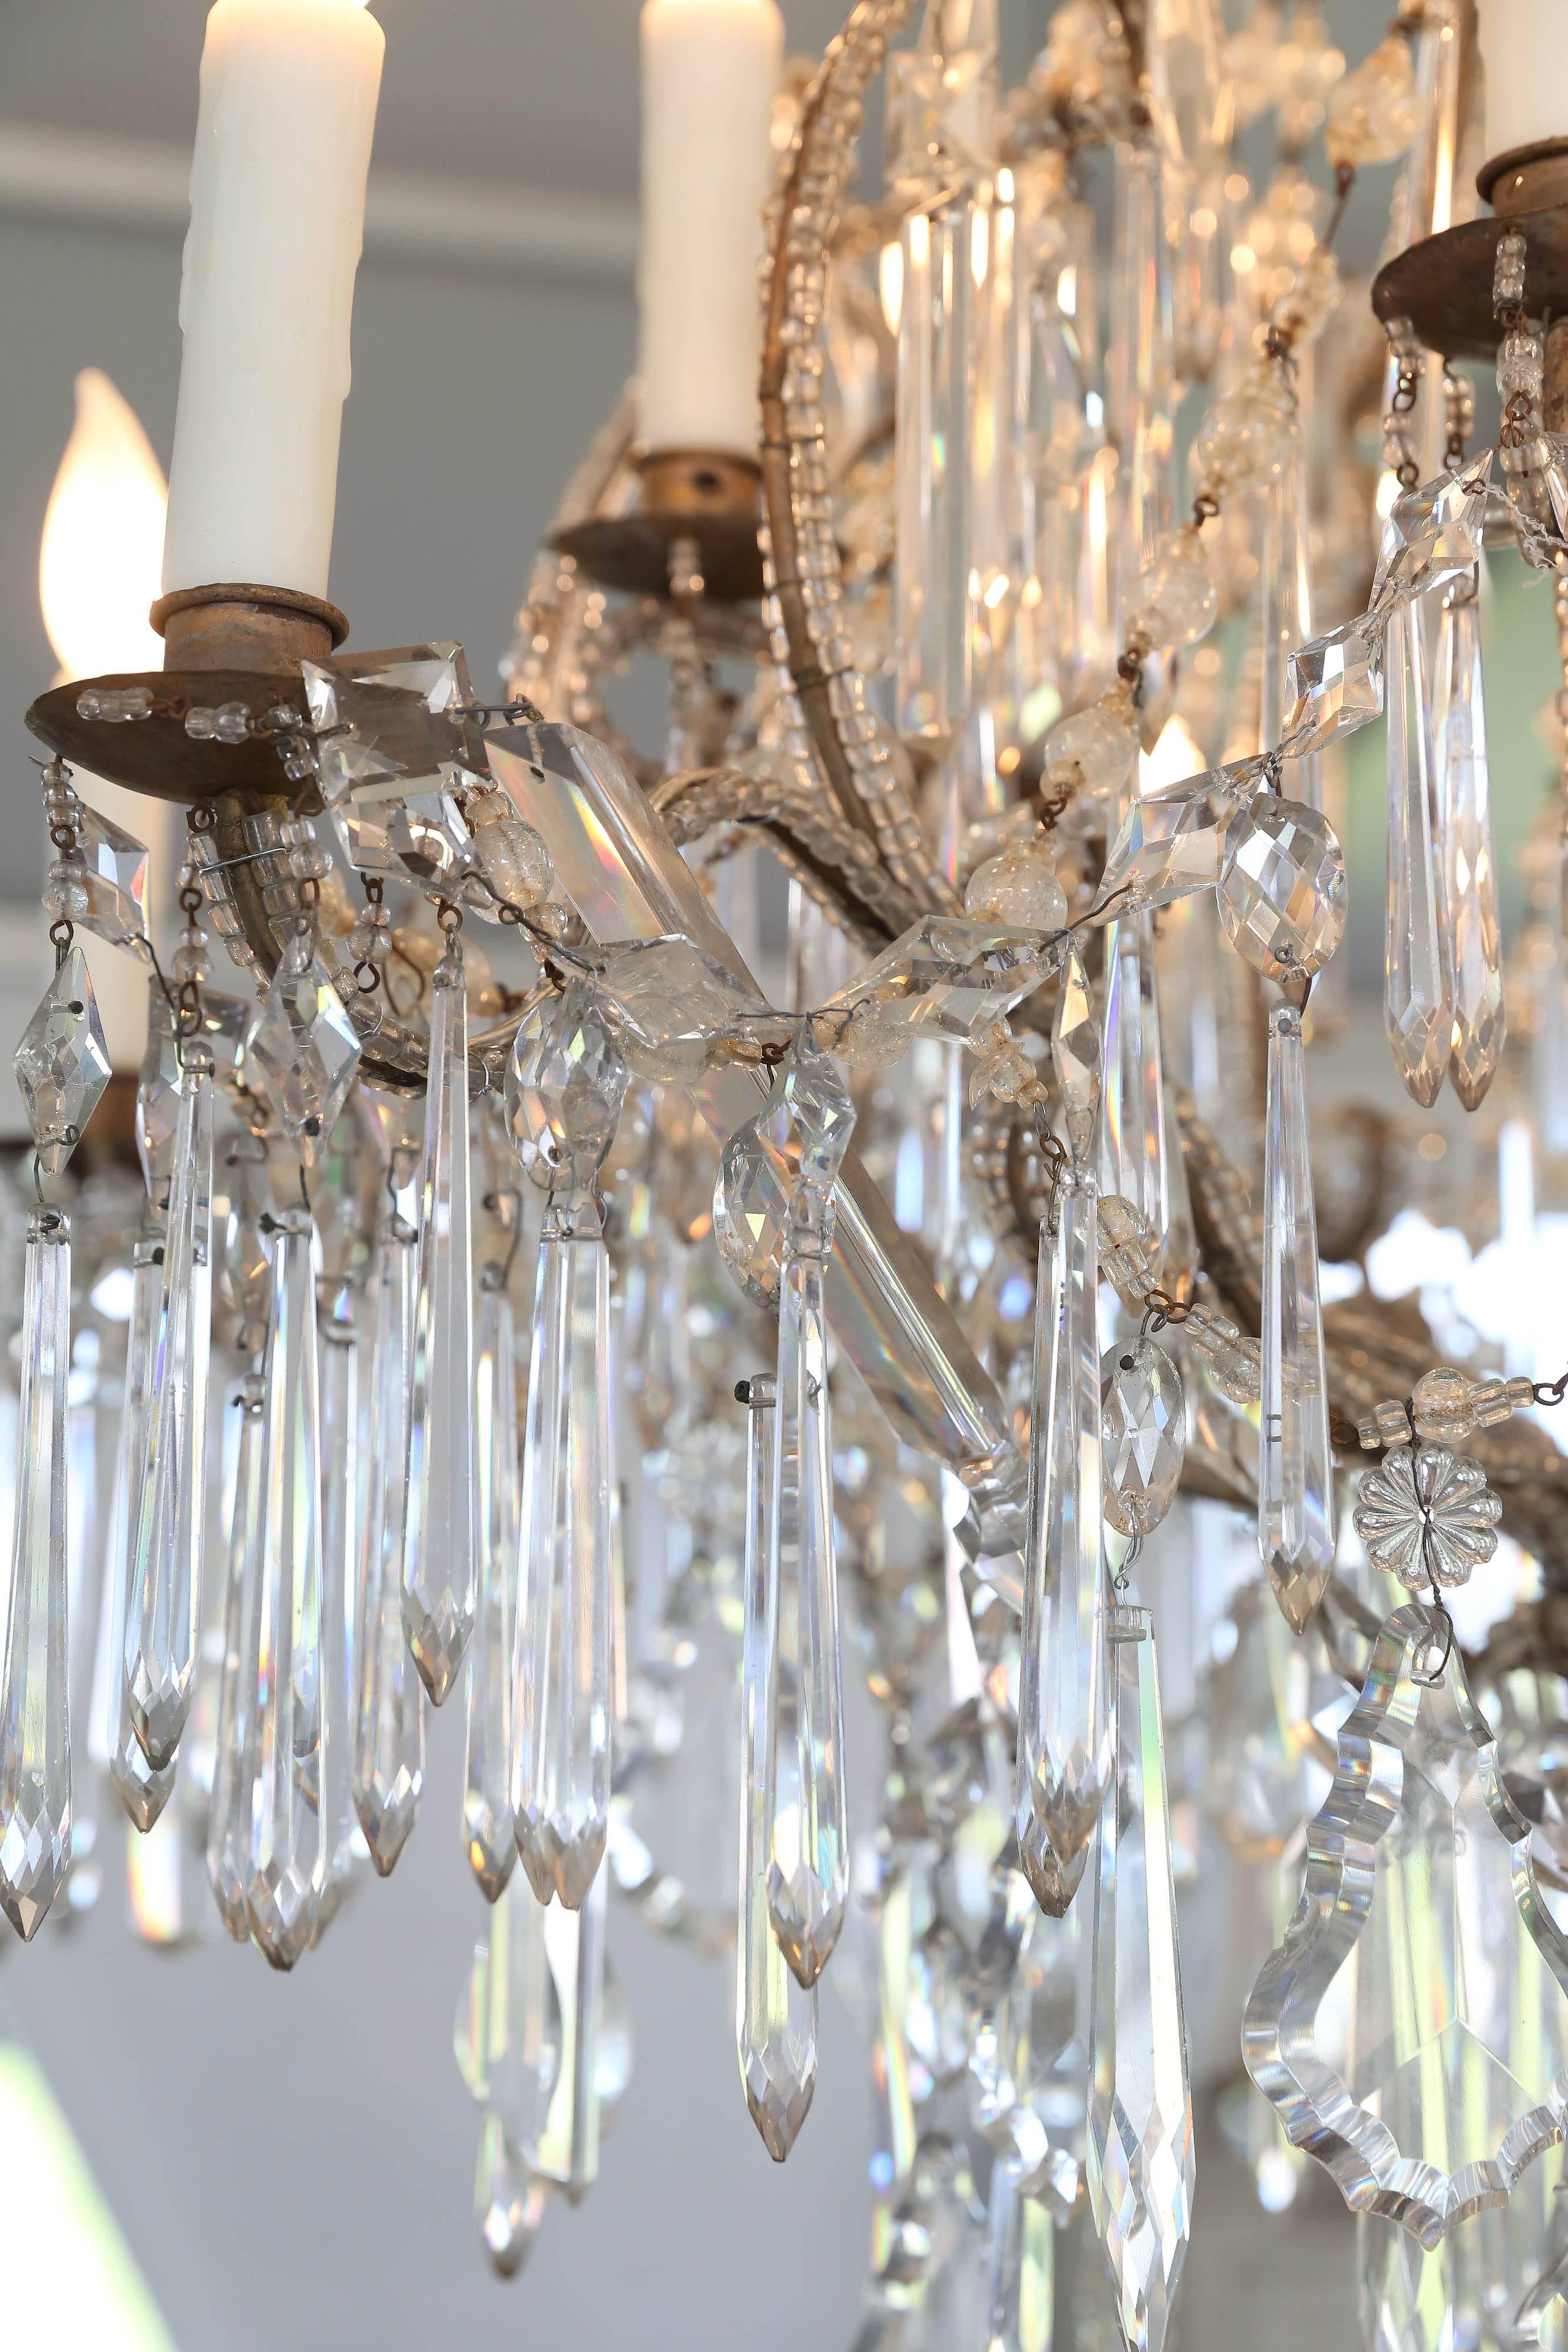 This is an absolutely breathtaking chandelier in person. It is full of crystals and has been newly wired for USA standard. It does have minor loses of missing crystal but doesn't at all take away from it's beauty. It Italian at it's best.